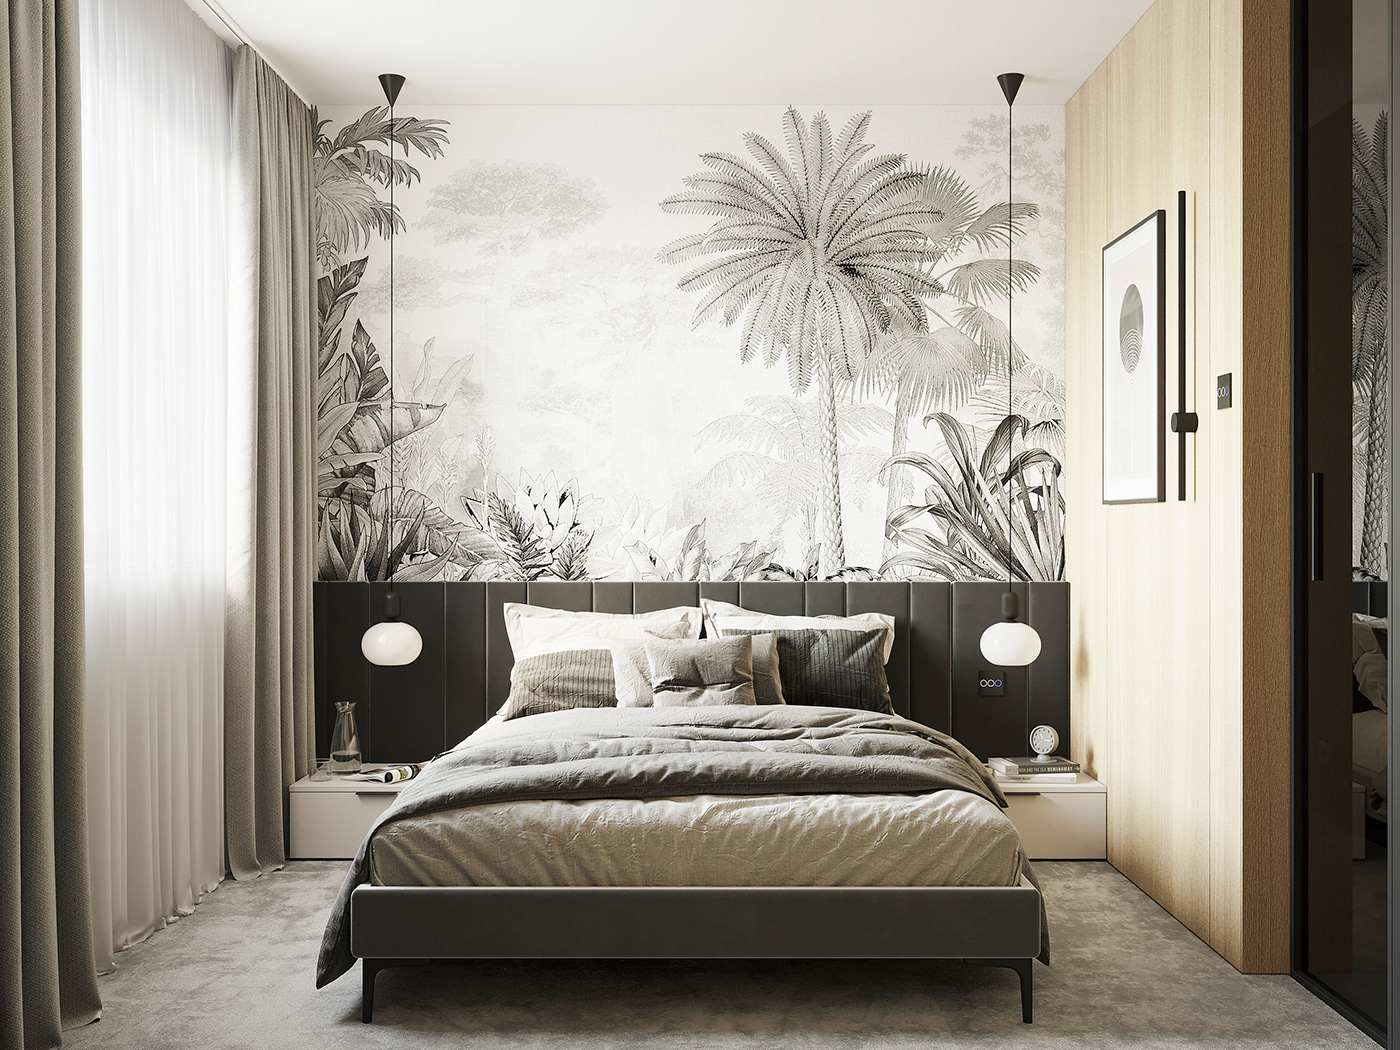 A bedroom with neutral colors and a large bed provides a relaxing atmosphere.